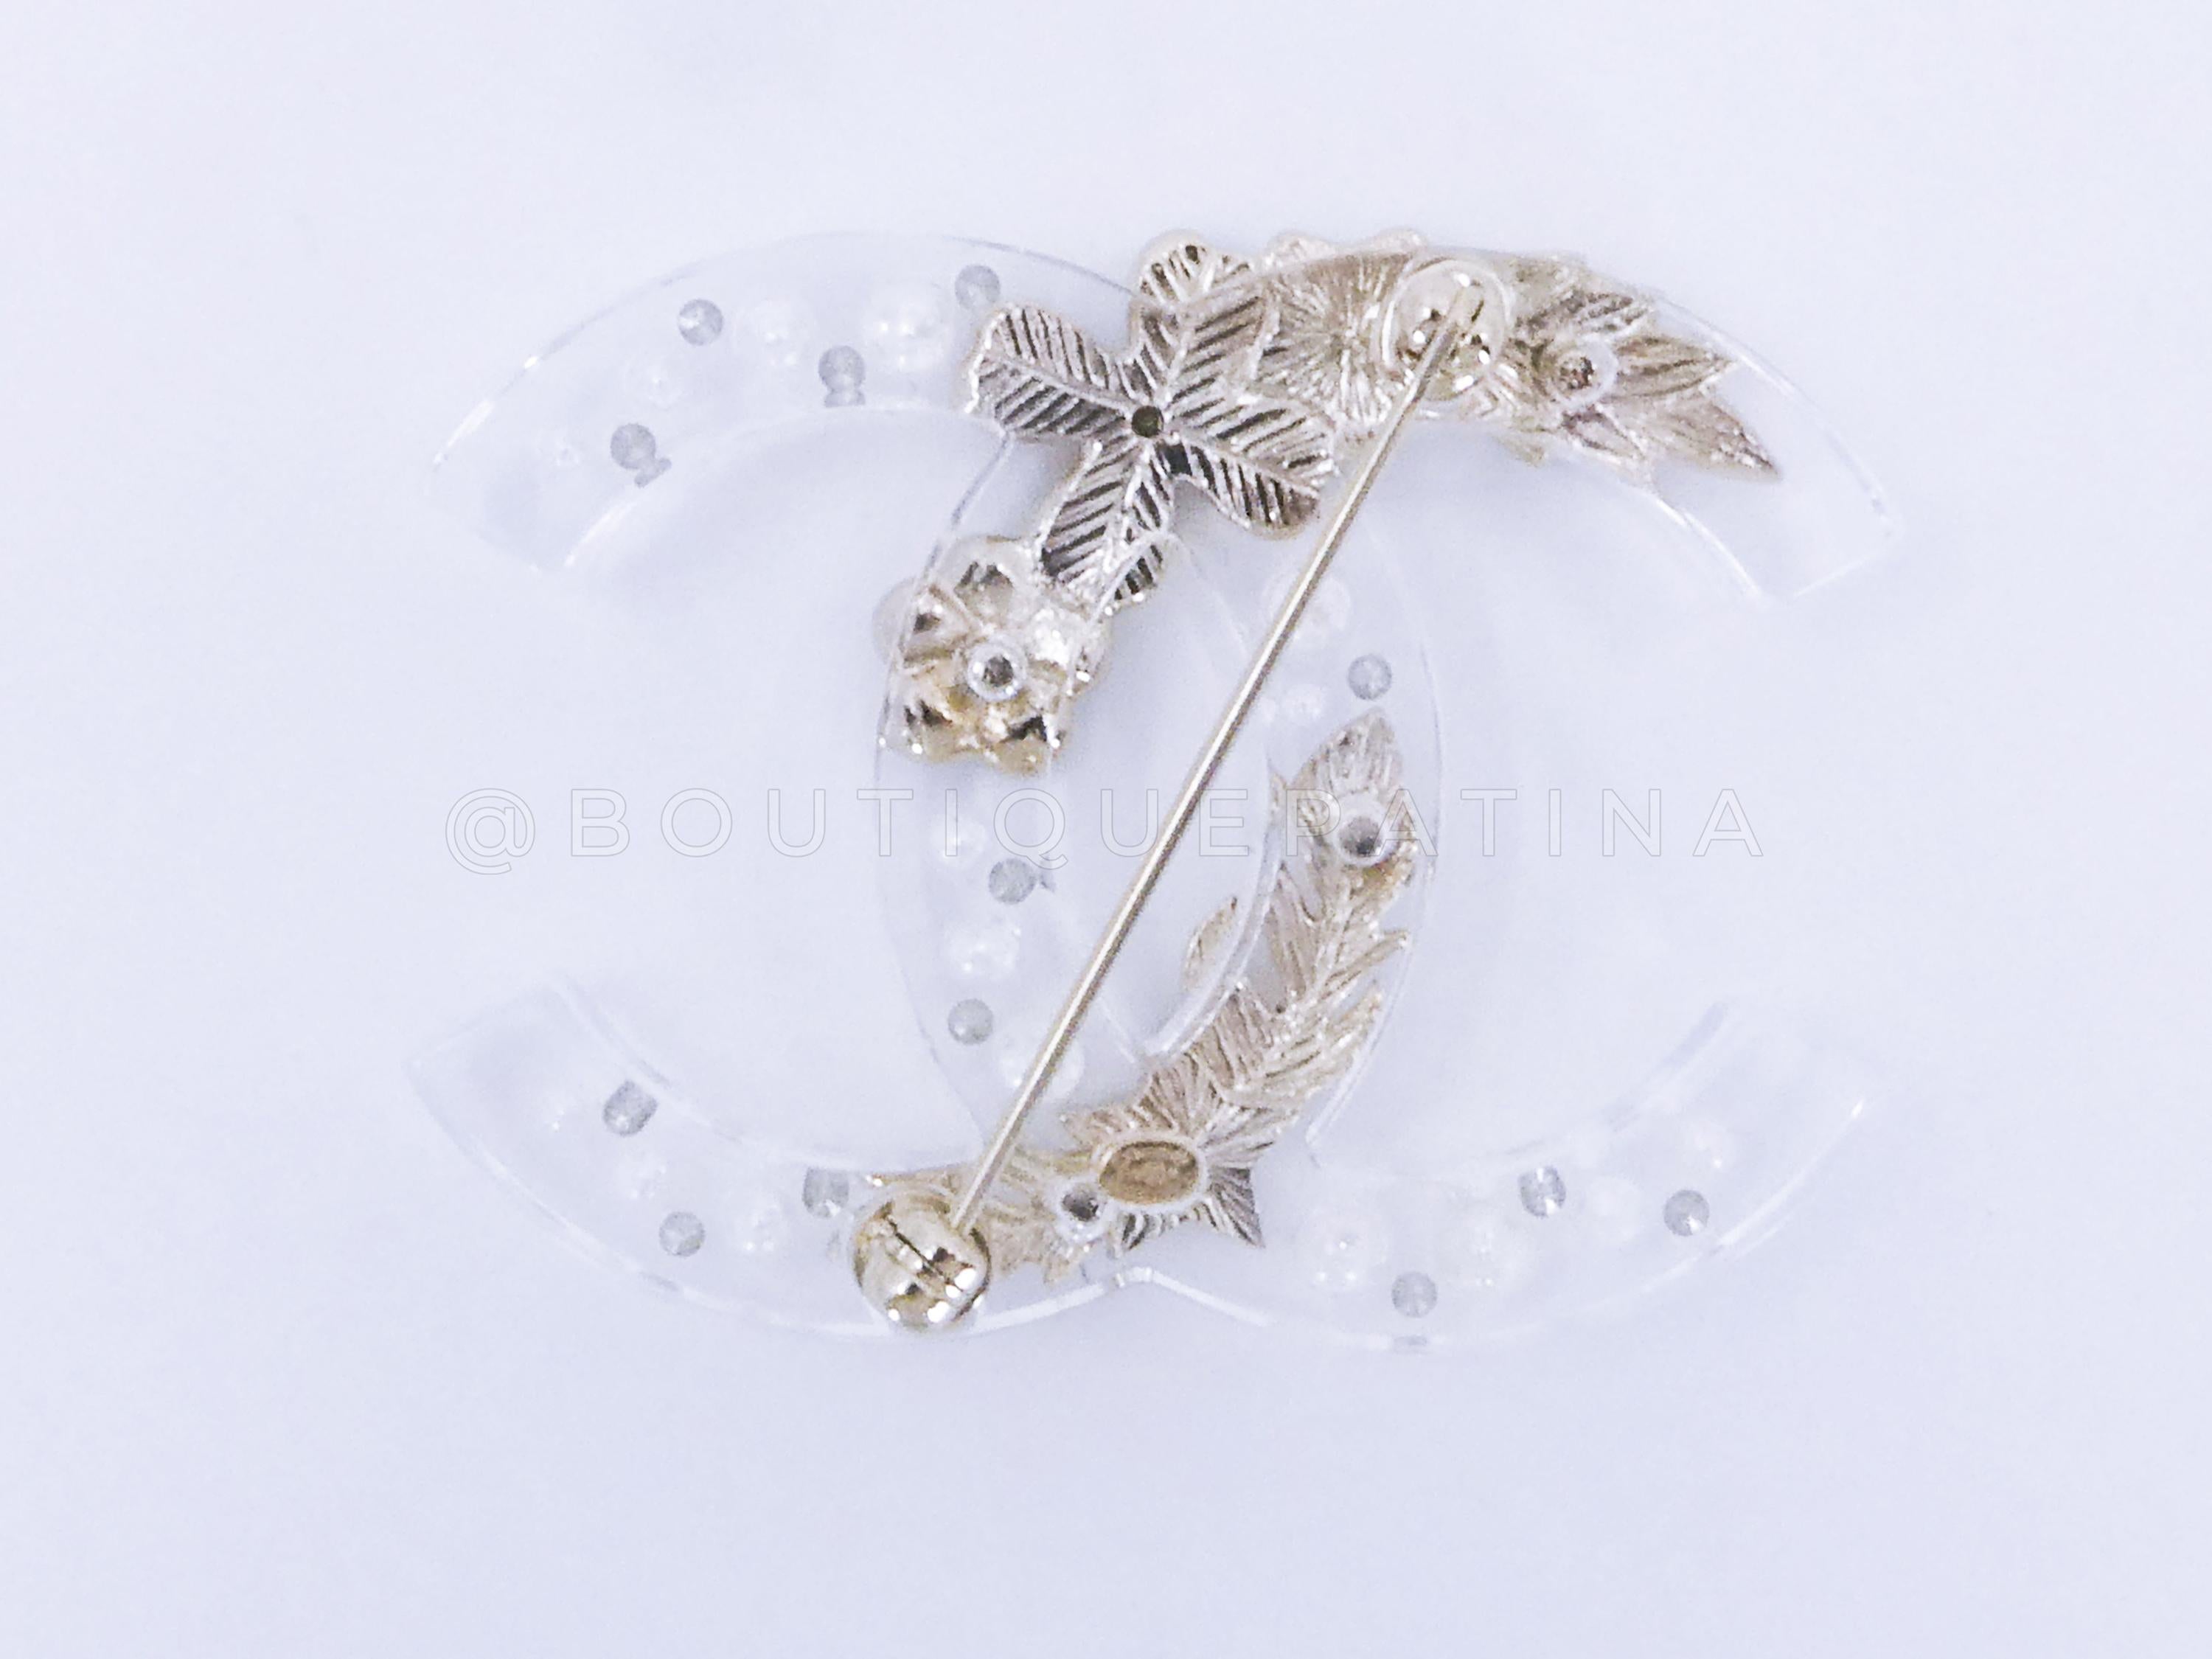 Store item: 66079
Chanel 19K Clear Acrylic Lucite CC Ornament Brooch 
Stamped 19K for 2019 Fall/Winter

White clear acrylic embedded with brushed gold, faux pearl and crystal ornaments

Condition: Excellent
For 19 years, Boutique Patina has